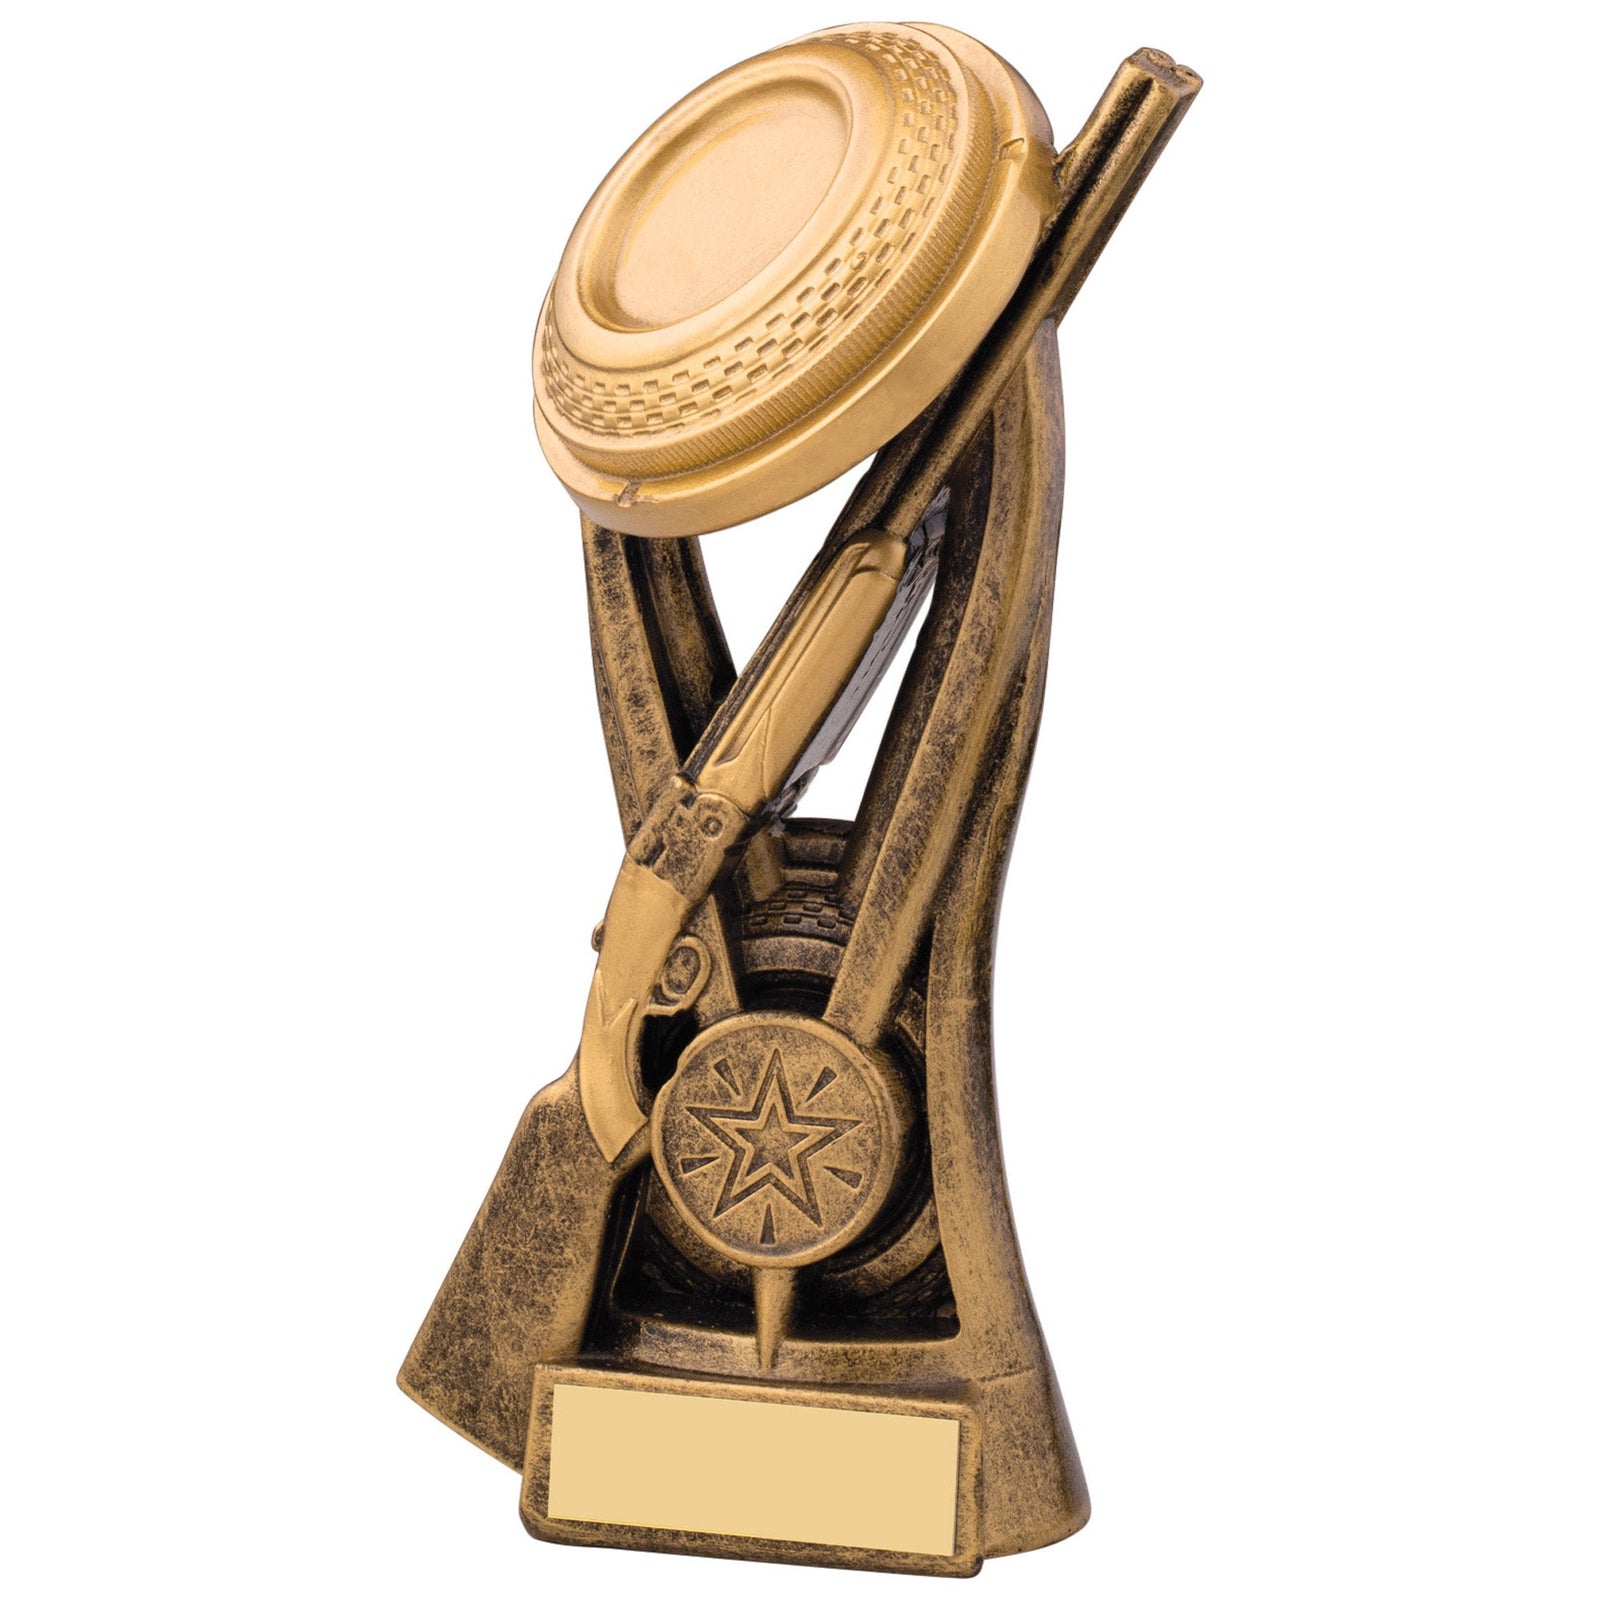 Clay Shooting Trophy - Available with Engraving and Custom 1